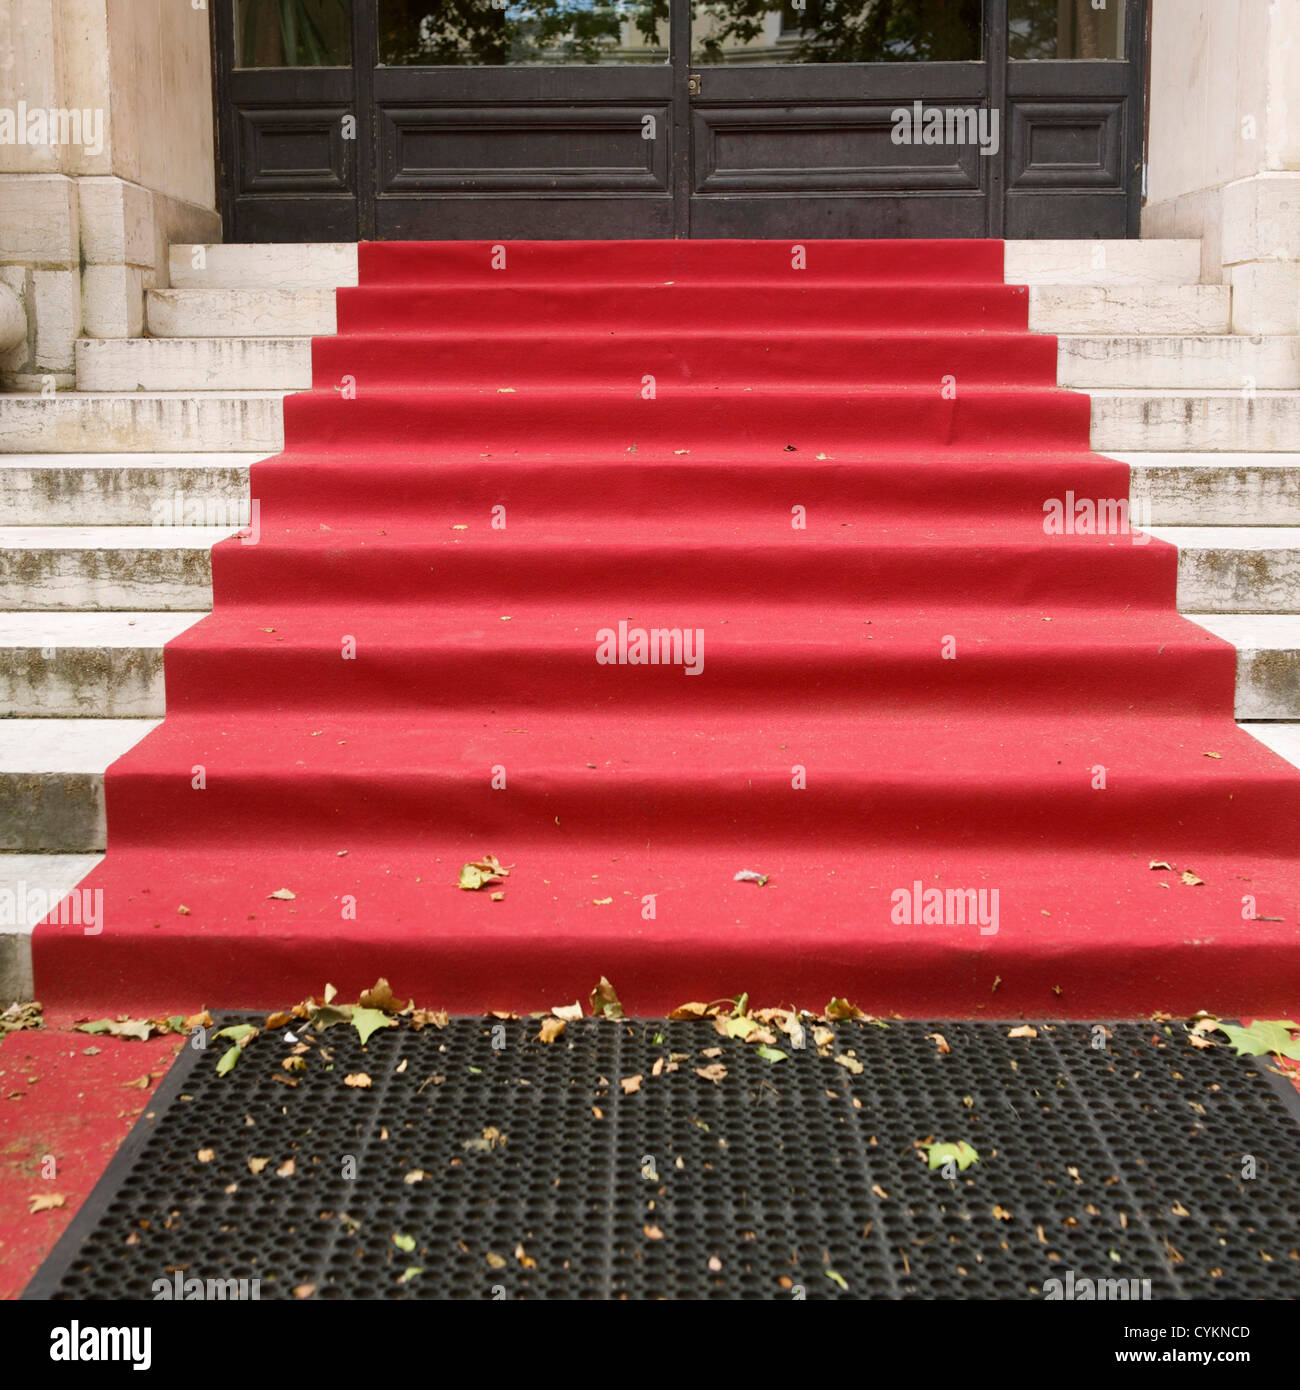 Red carpet on stairs outdoors Stock Photo - Alamy